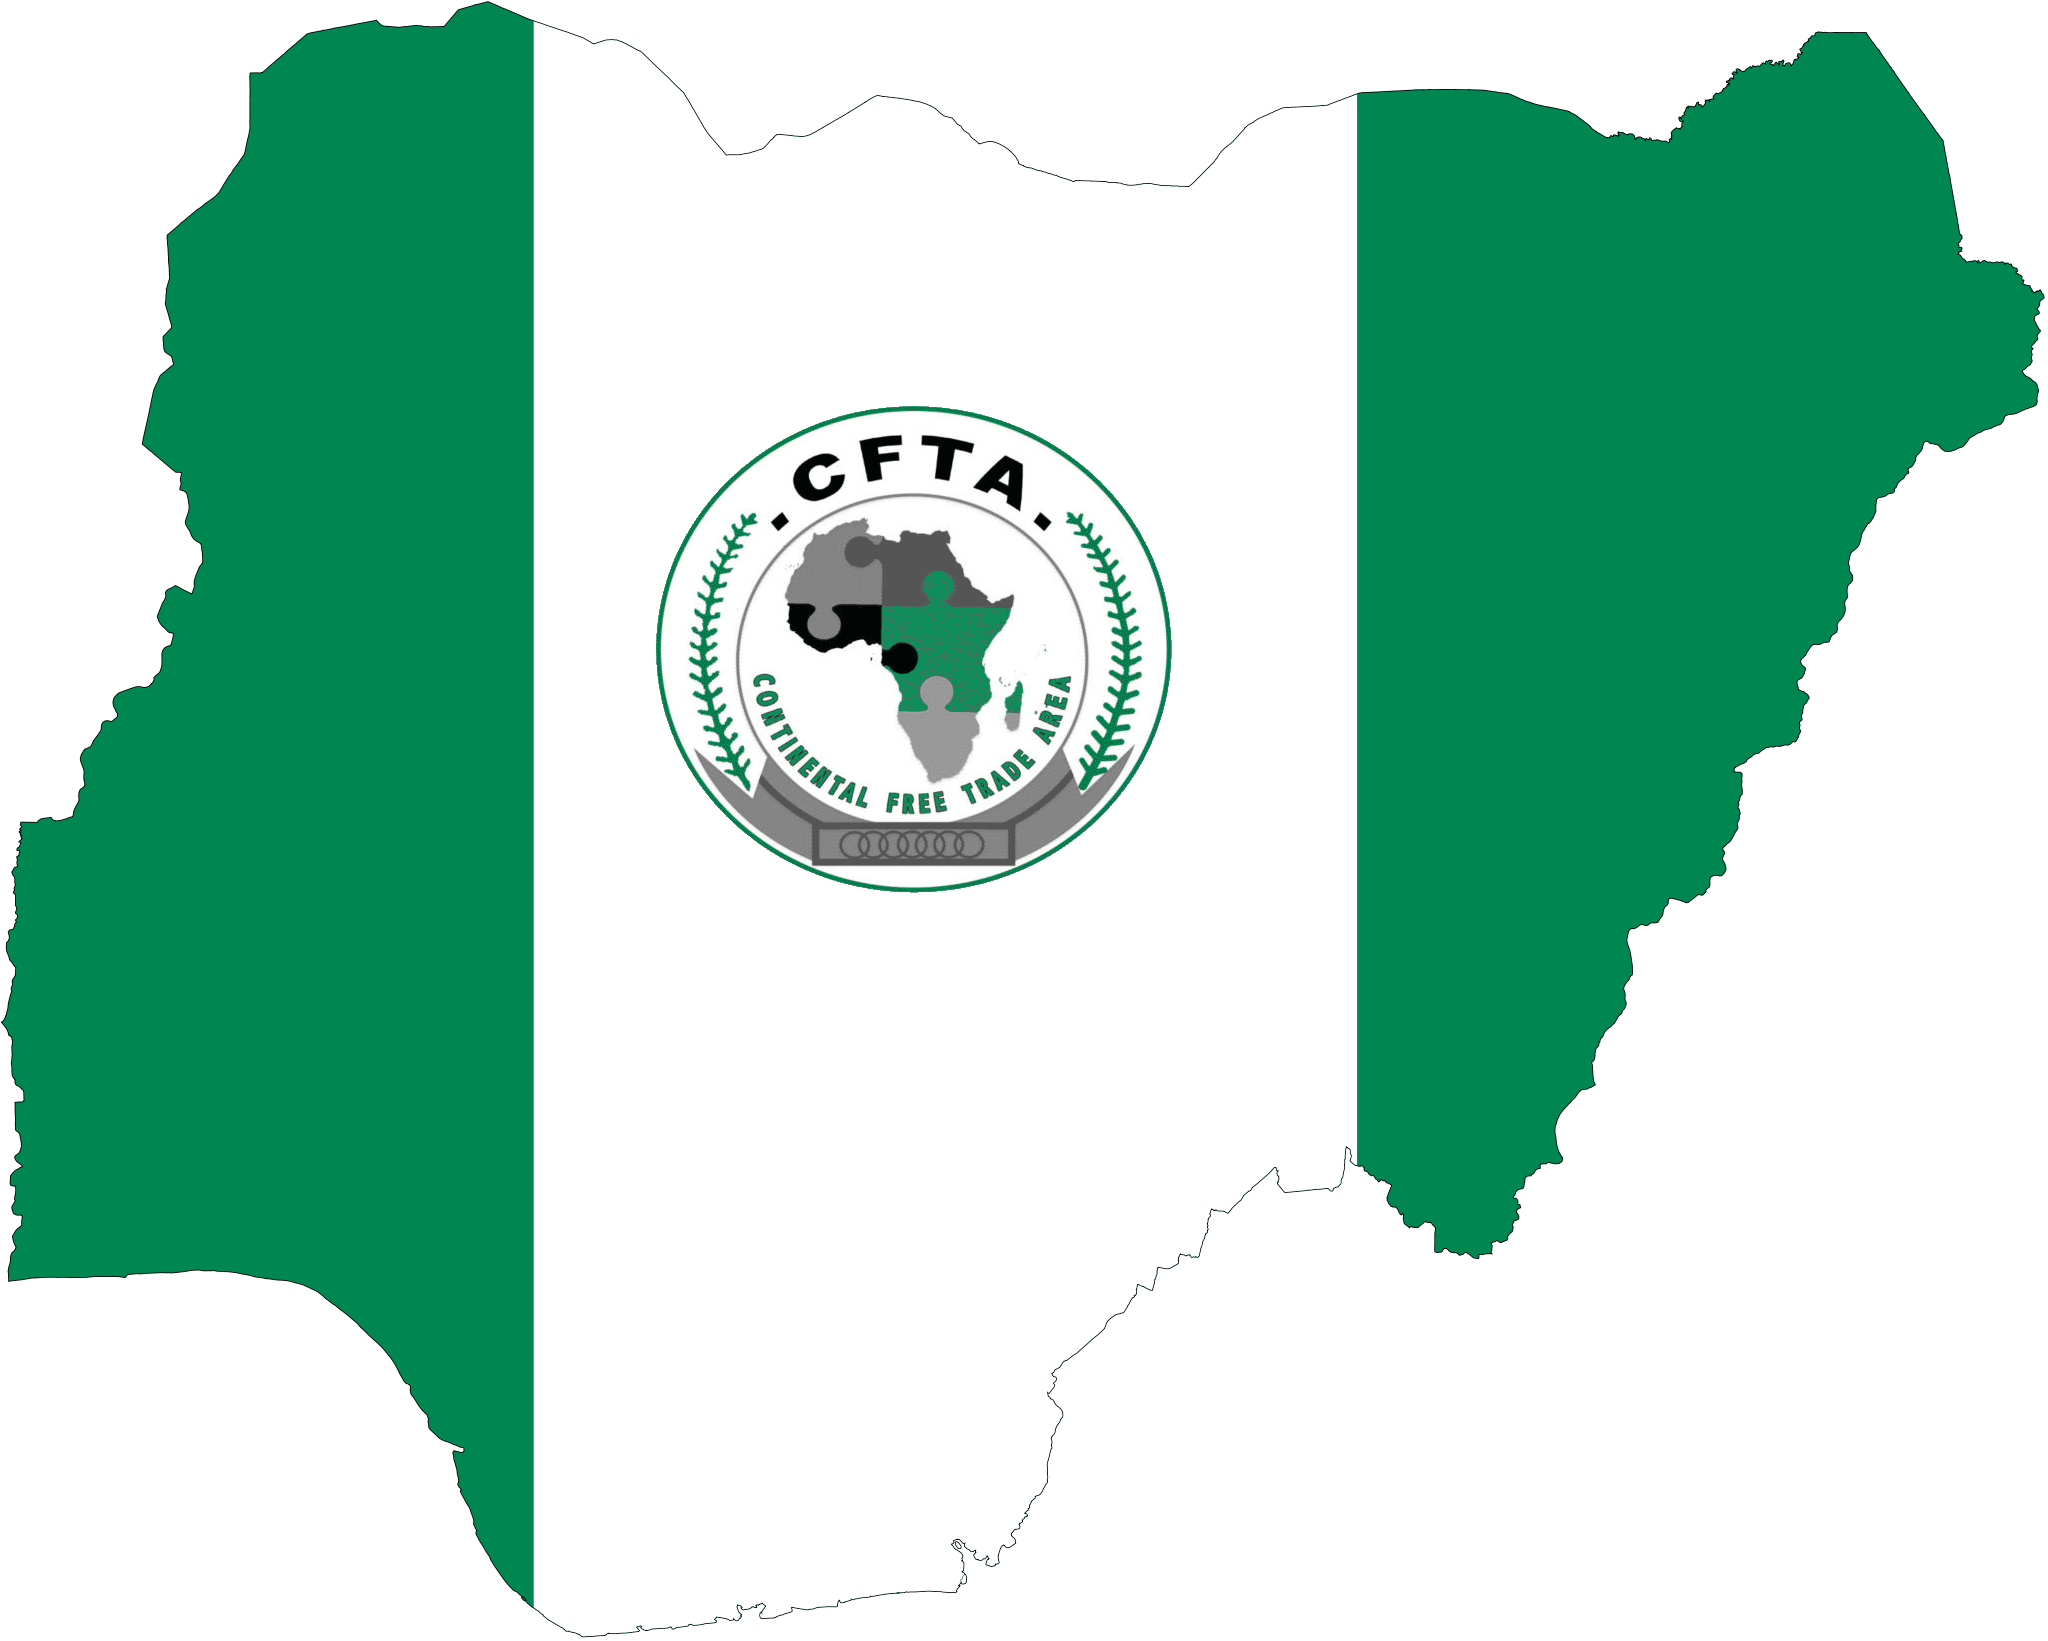 AfCFTA: What It Means For Nigeria